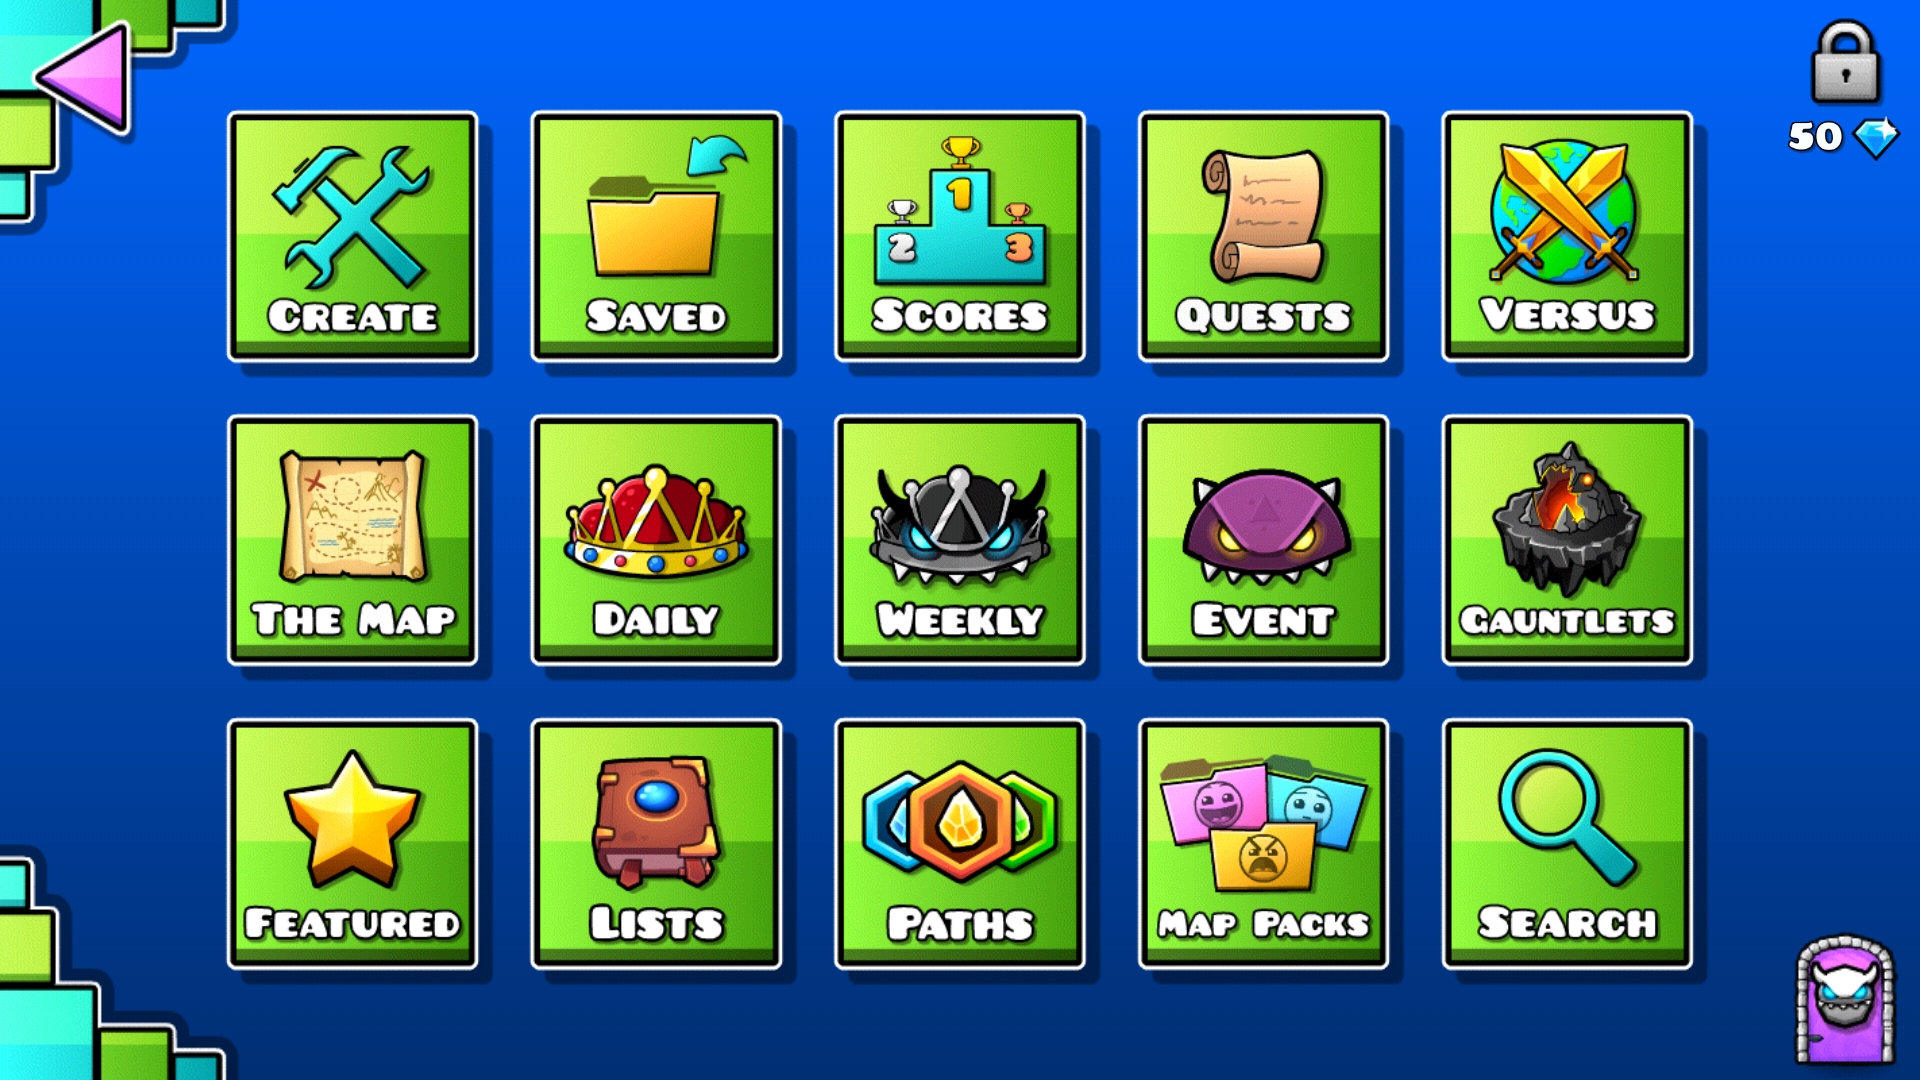 Cvolton Event Christmas Geometry Dash World Online Unlock Full Version Bypass On Today's Update For Android Enjoy :D Note: The Safe Still Says It's Only Available In